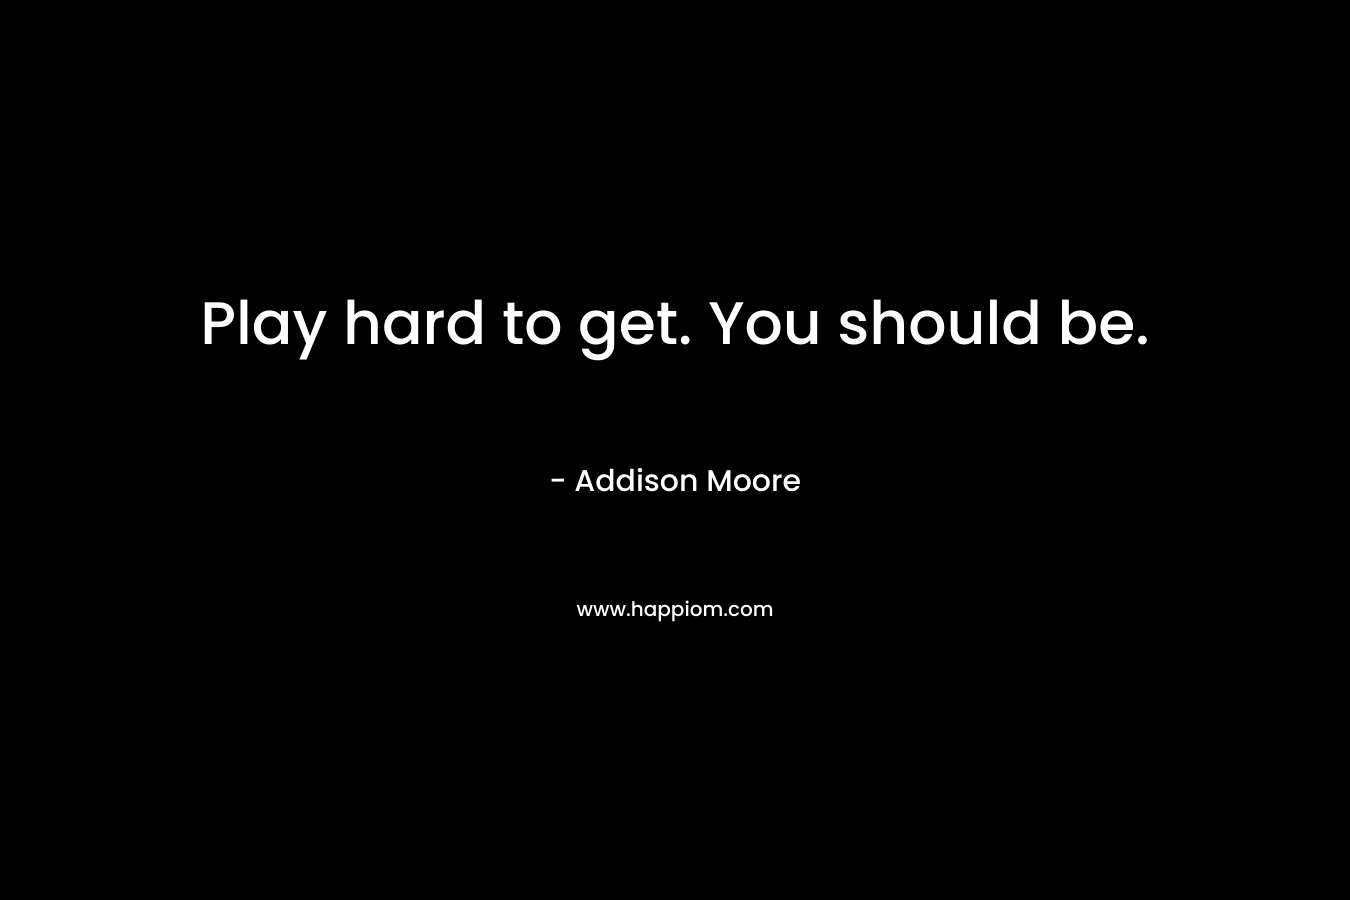 Play hard to get. You should be.